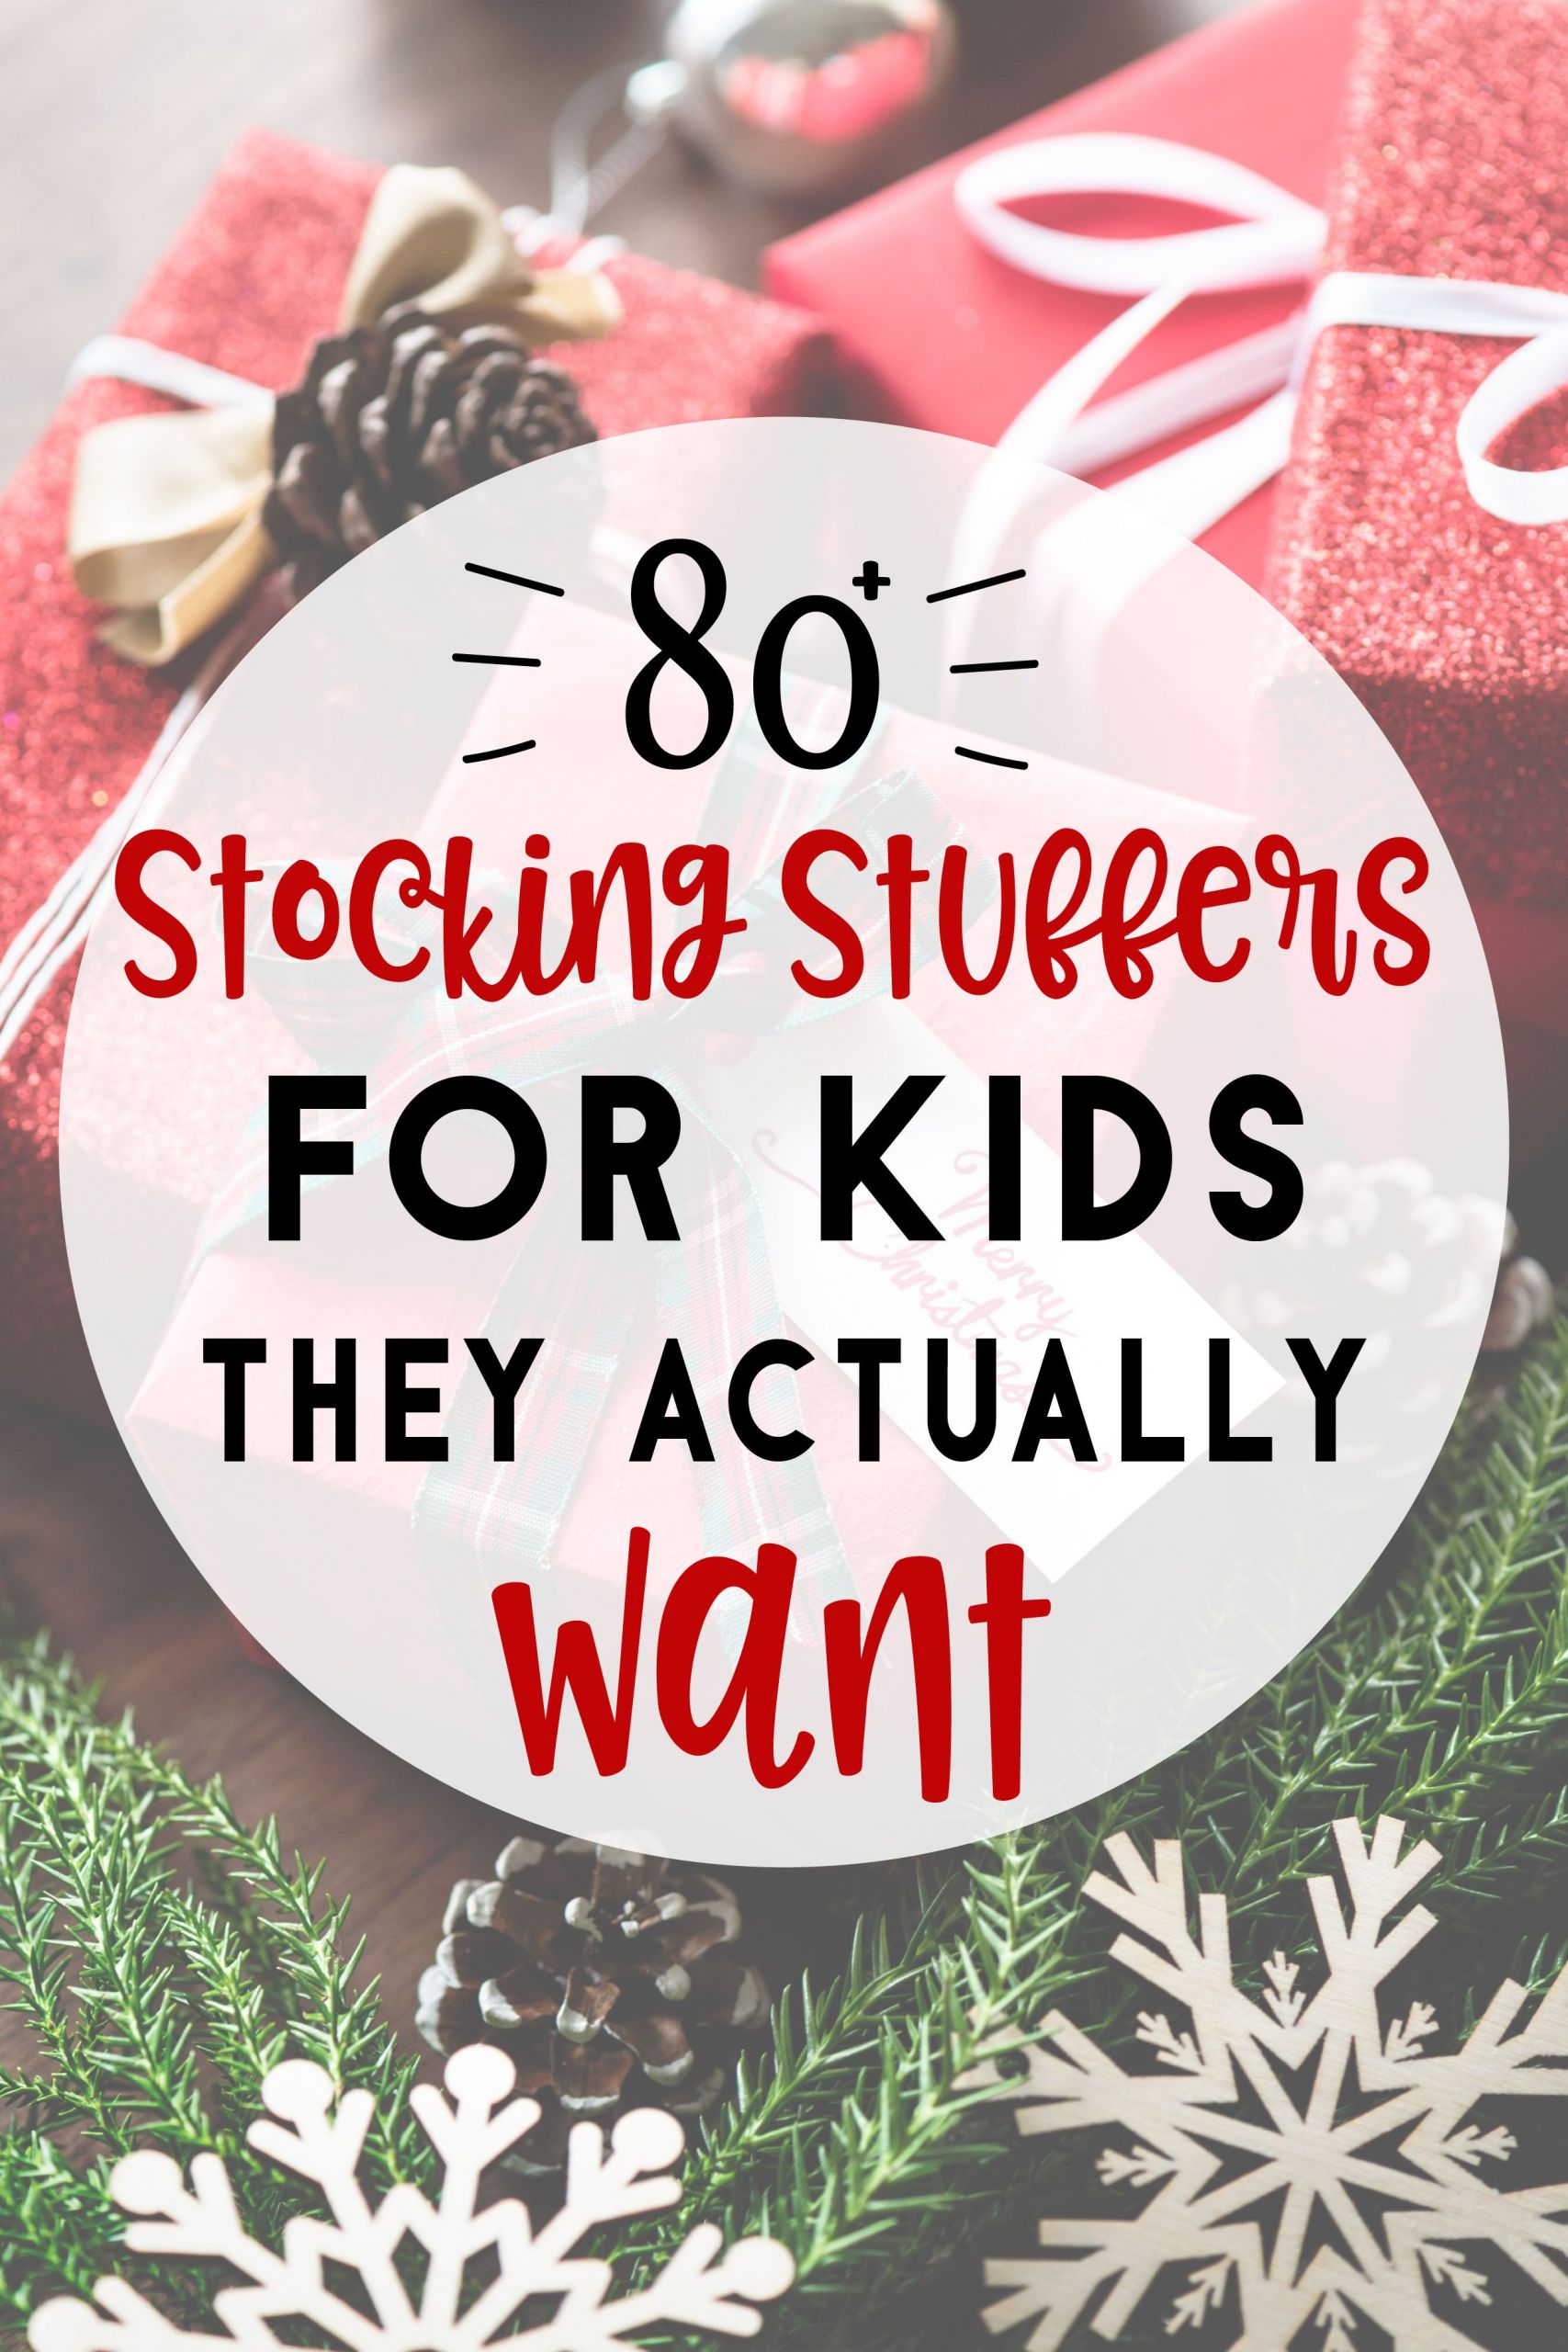 Gifts For Kids Under $5
 Stocking Stuffers for Kids under $5